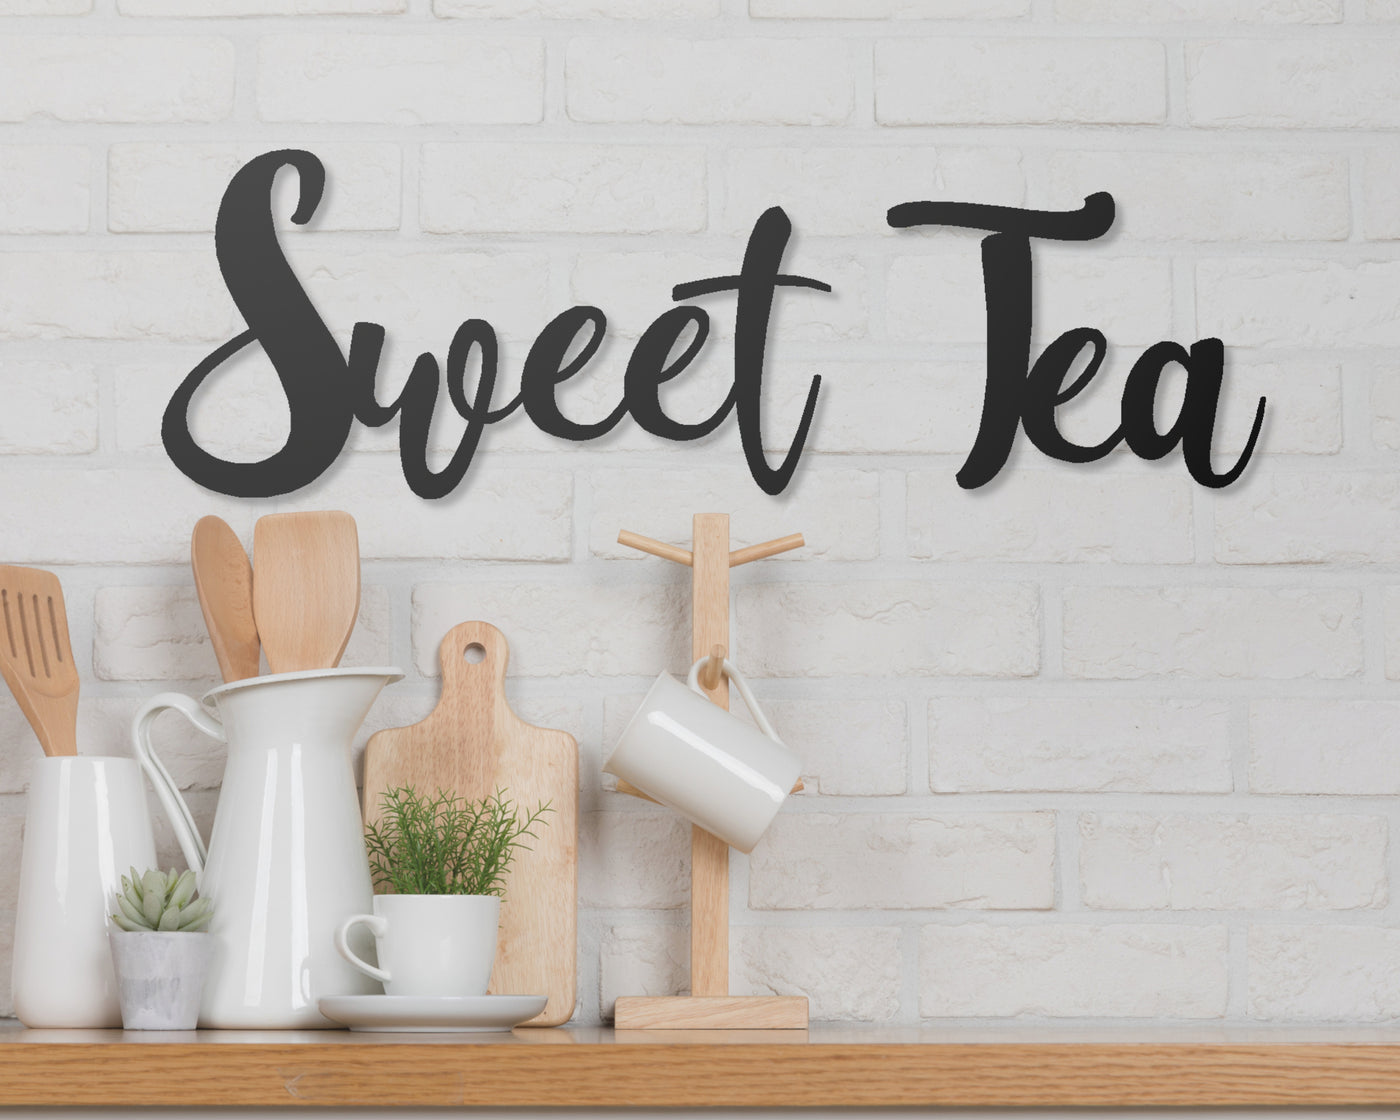 Sweet Tea Metal word sign - Madison Iron and Wood - Metal Word Art - metal outdoor decor - Steel deocrations - american made products - veteran owned business products - fencing decorations - fencing supplies - custom wall decorations - personalized wall signs - steel - decorative post caps - steel post caps - metal post caps - brackets - structural brackets - home improvement - easter - easter decorations - easter gift - easter yard decor